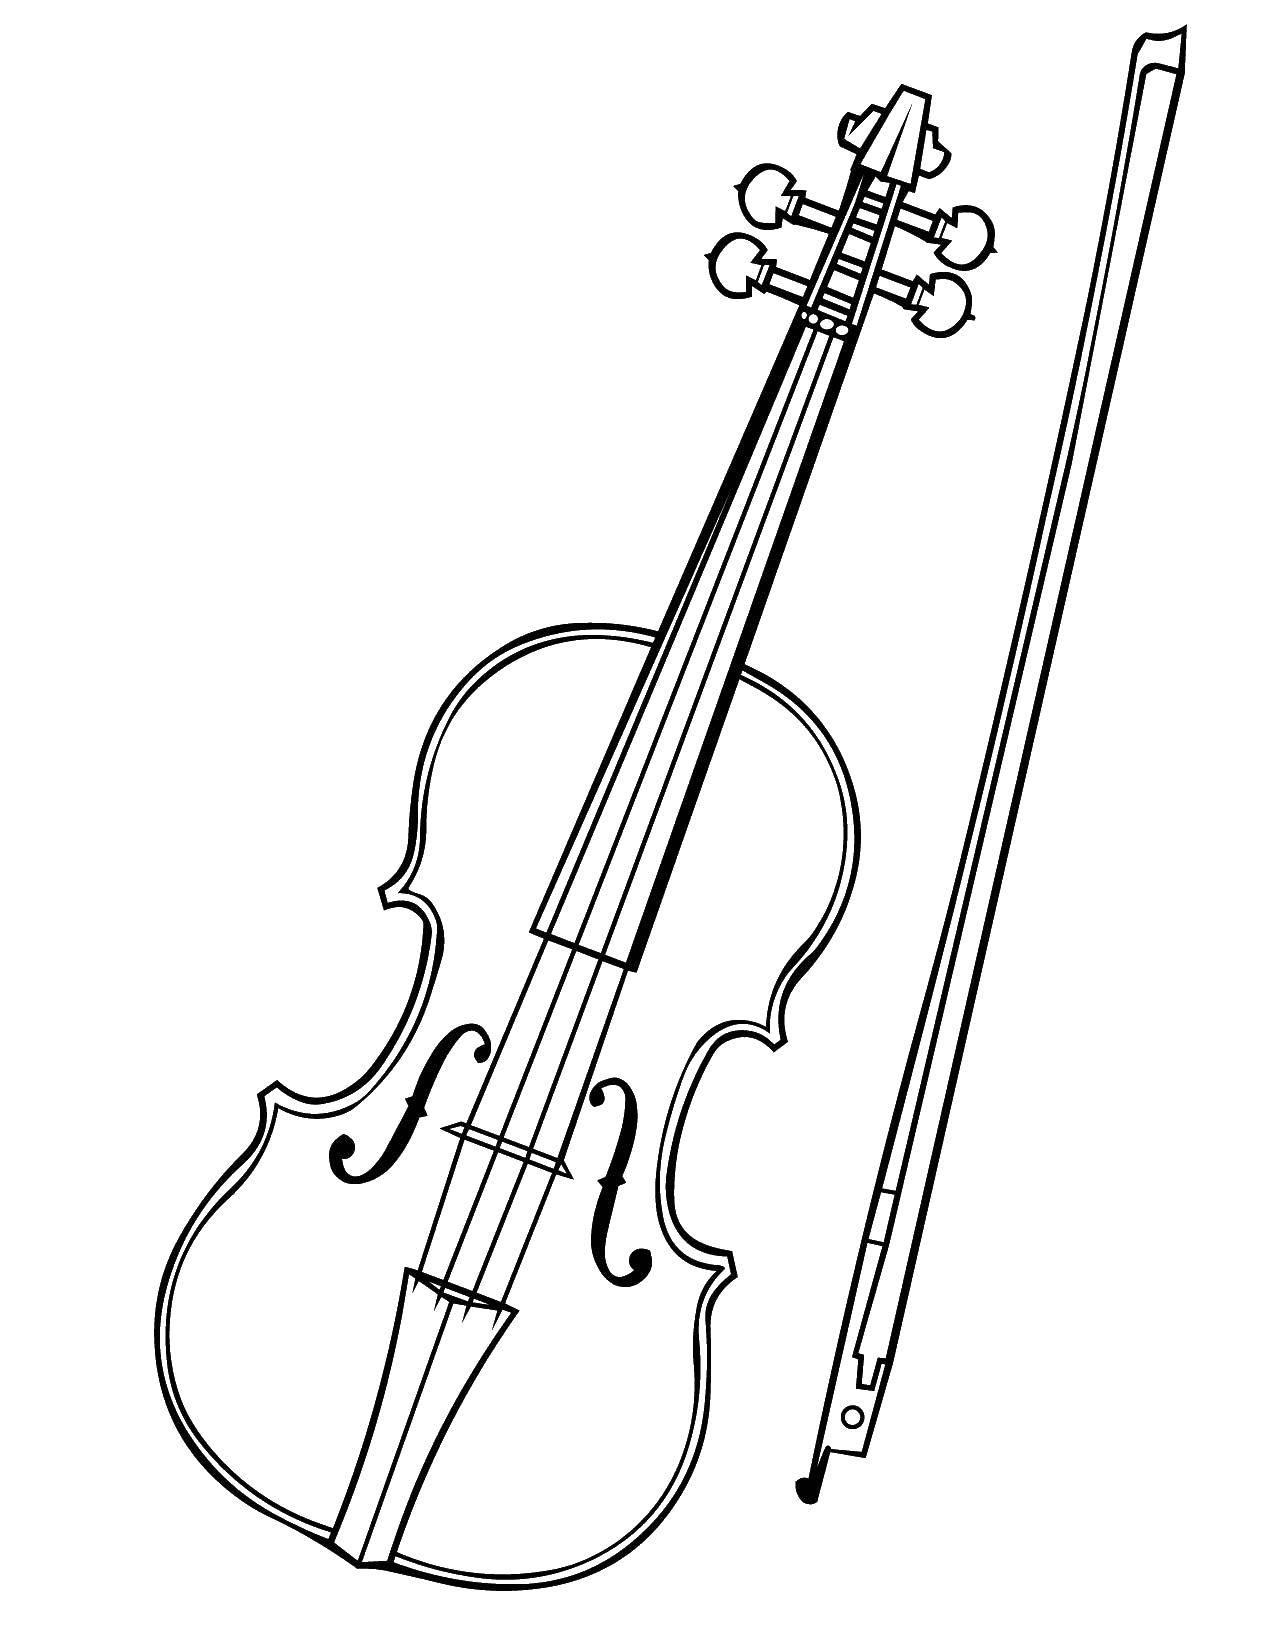 Coloring Cello and bow. Category Violin. Tags:  Music, instrument, musician.